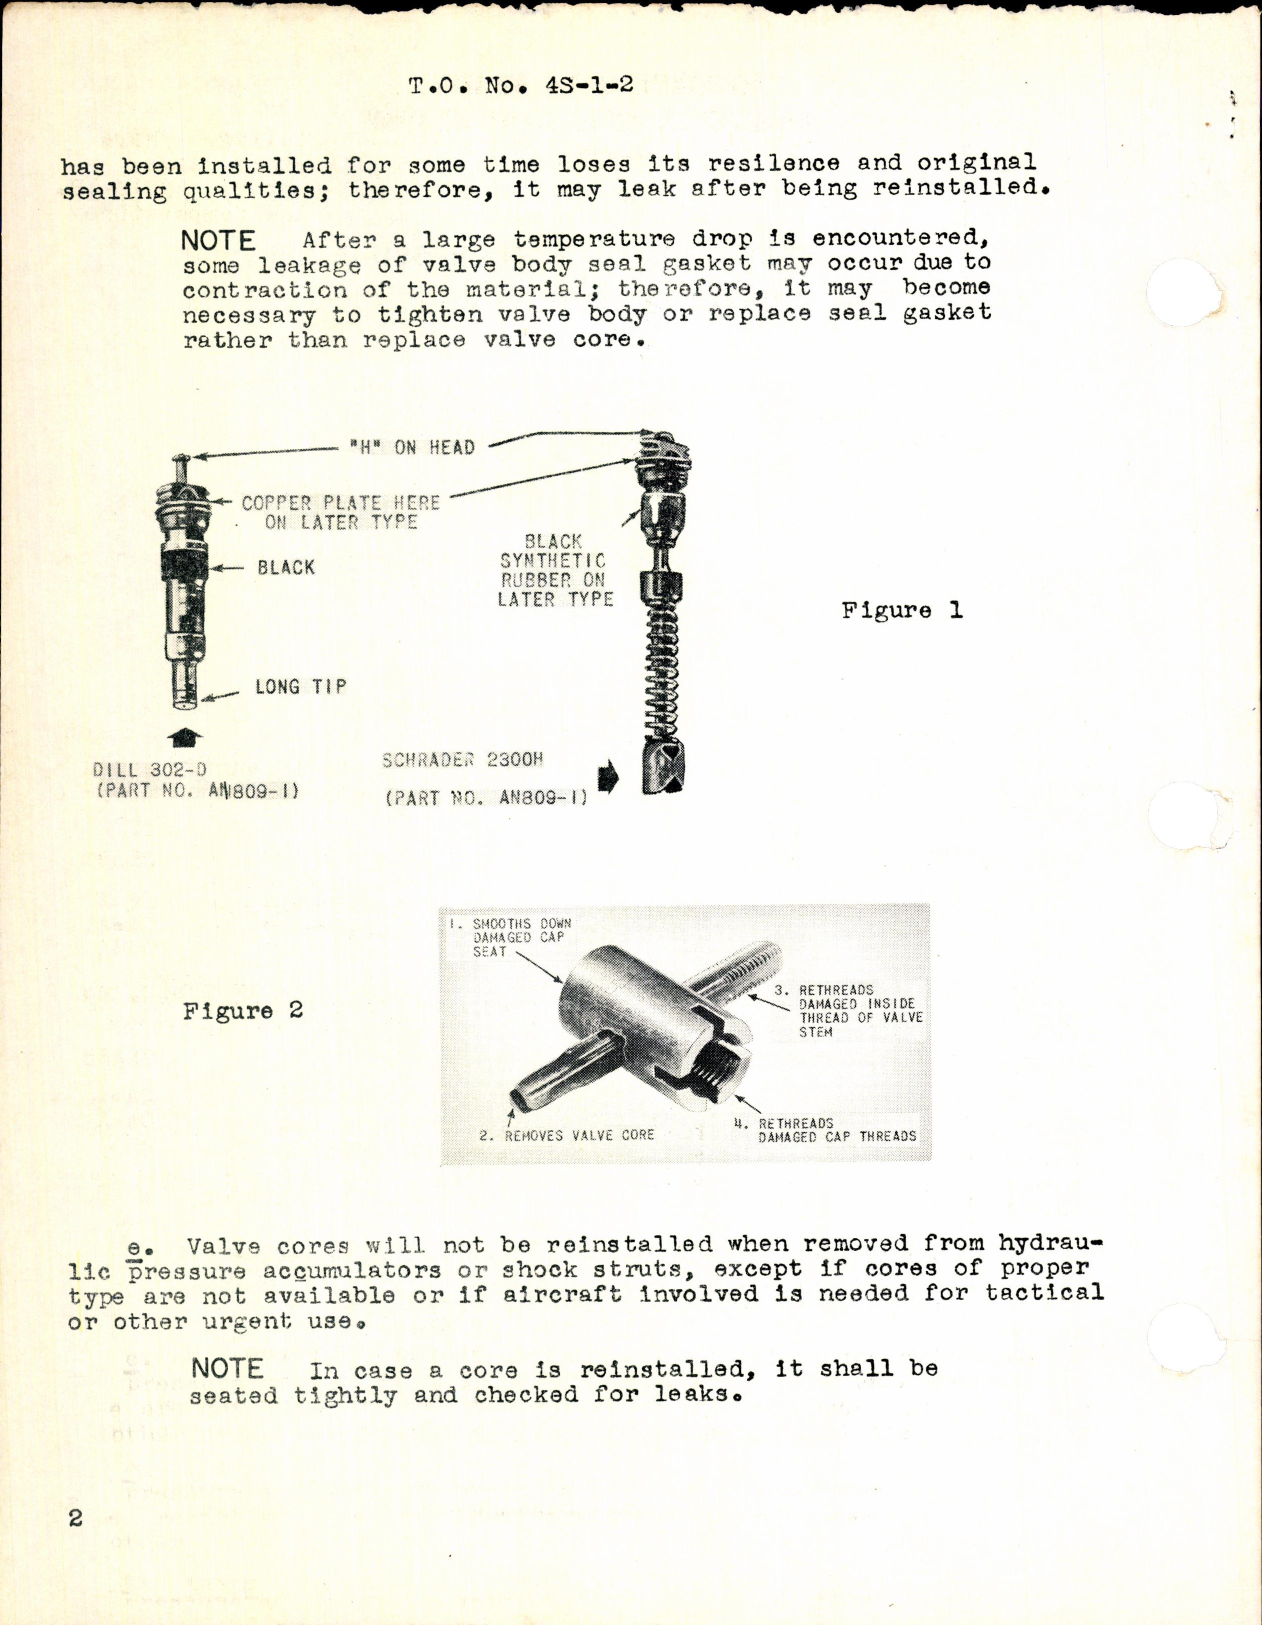 Sample page 2 from AirCorps Library document: Selection of High Pressure Air Valve Cores